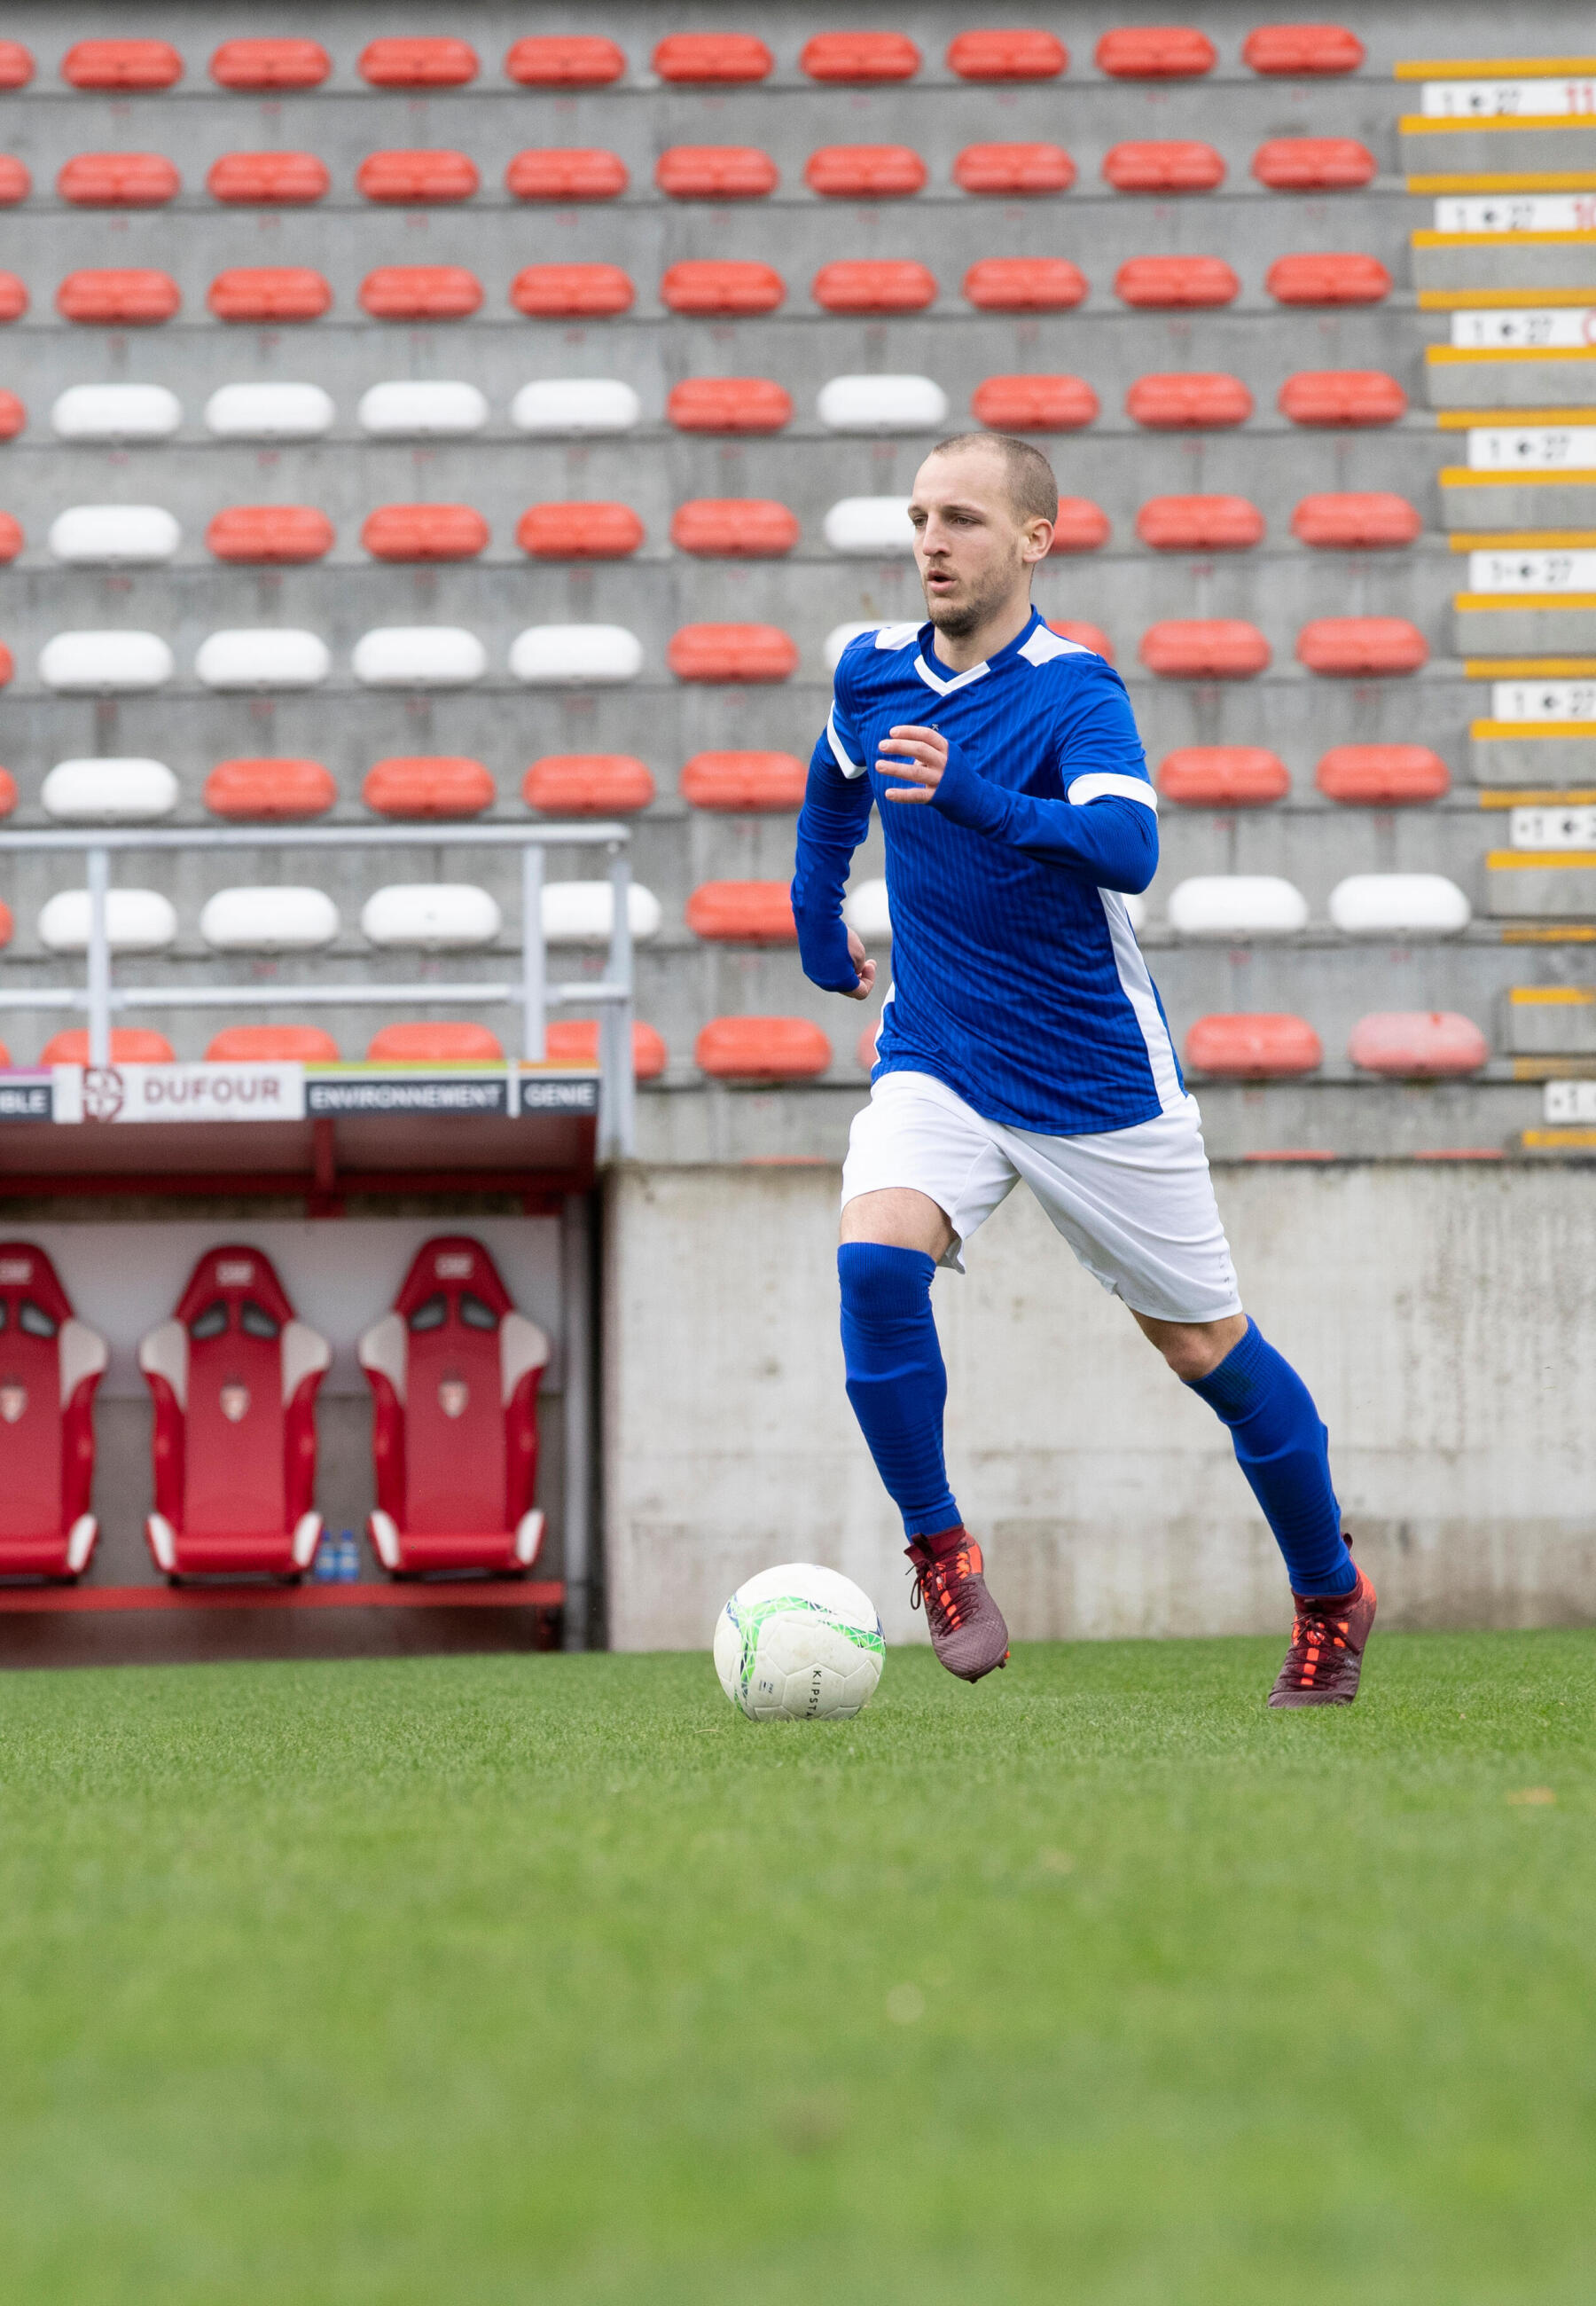 Gagner-place-titulaire-football